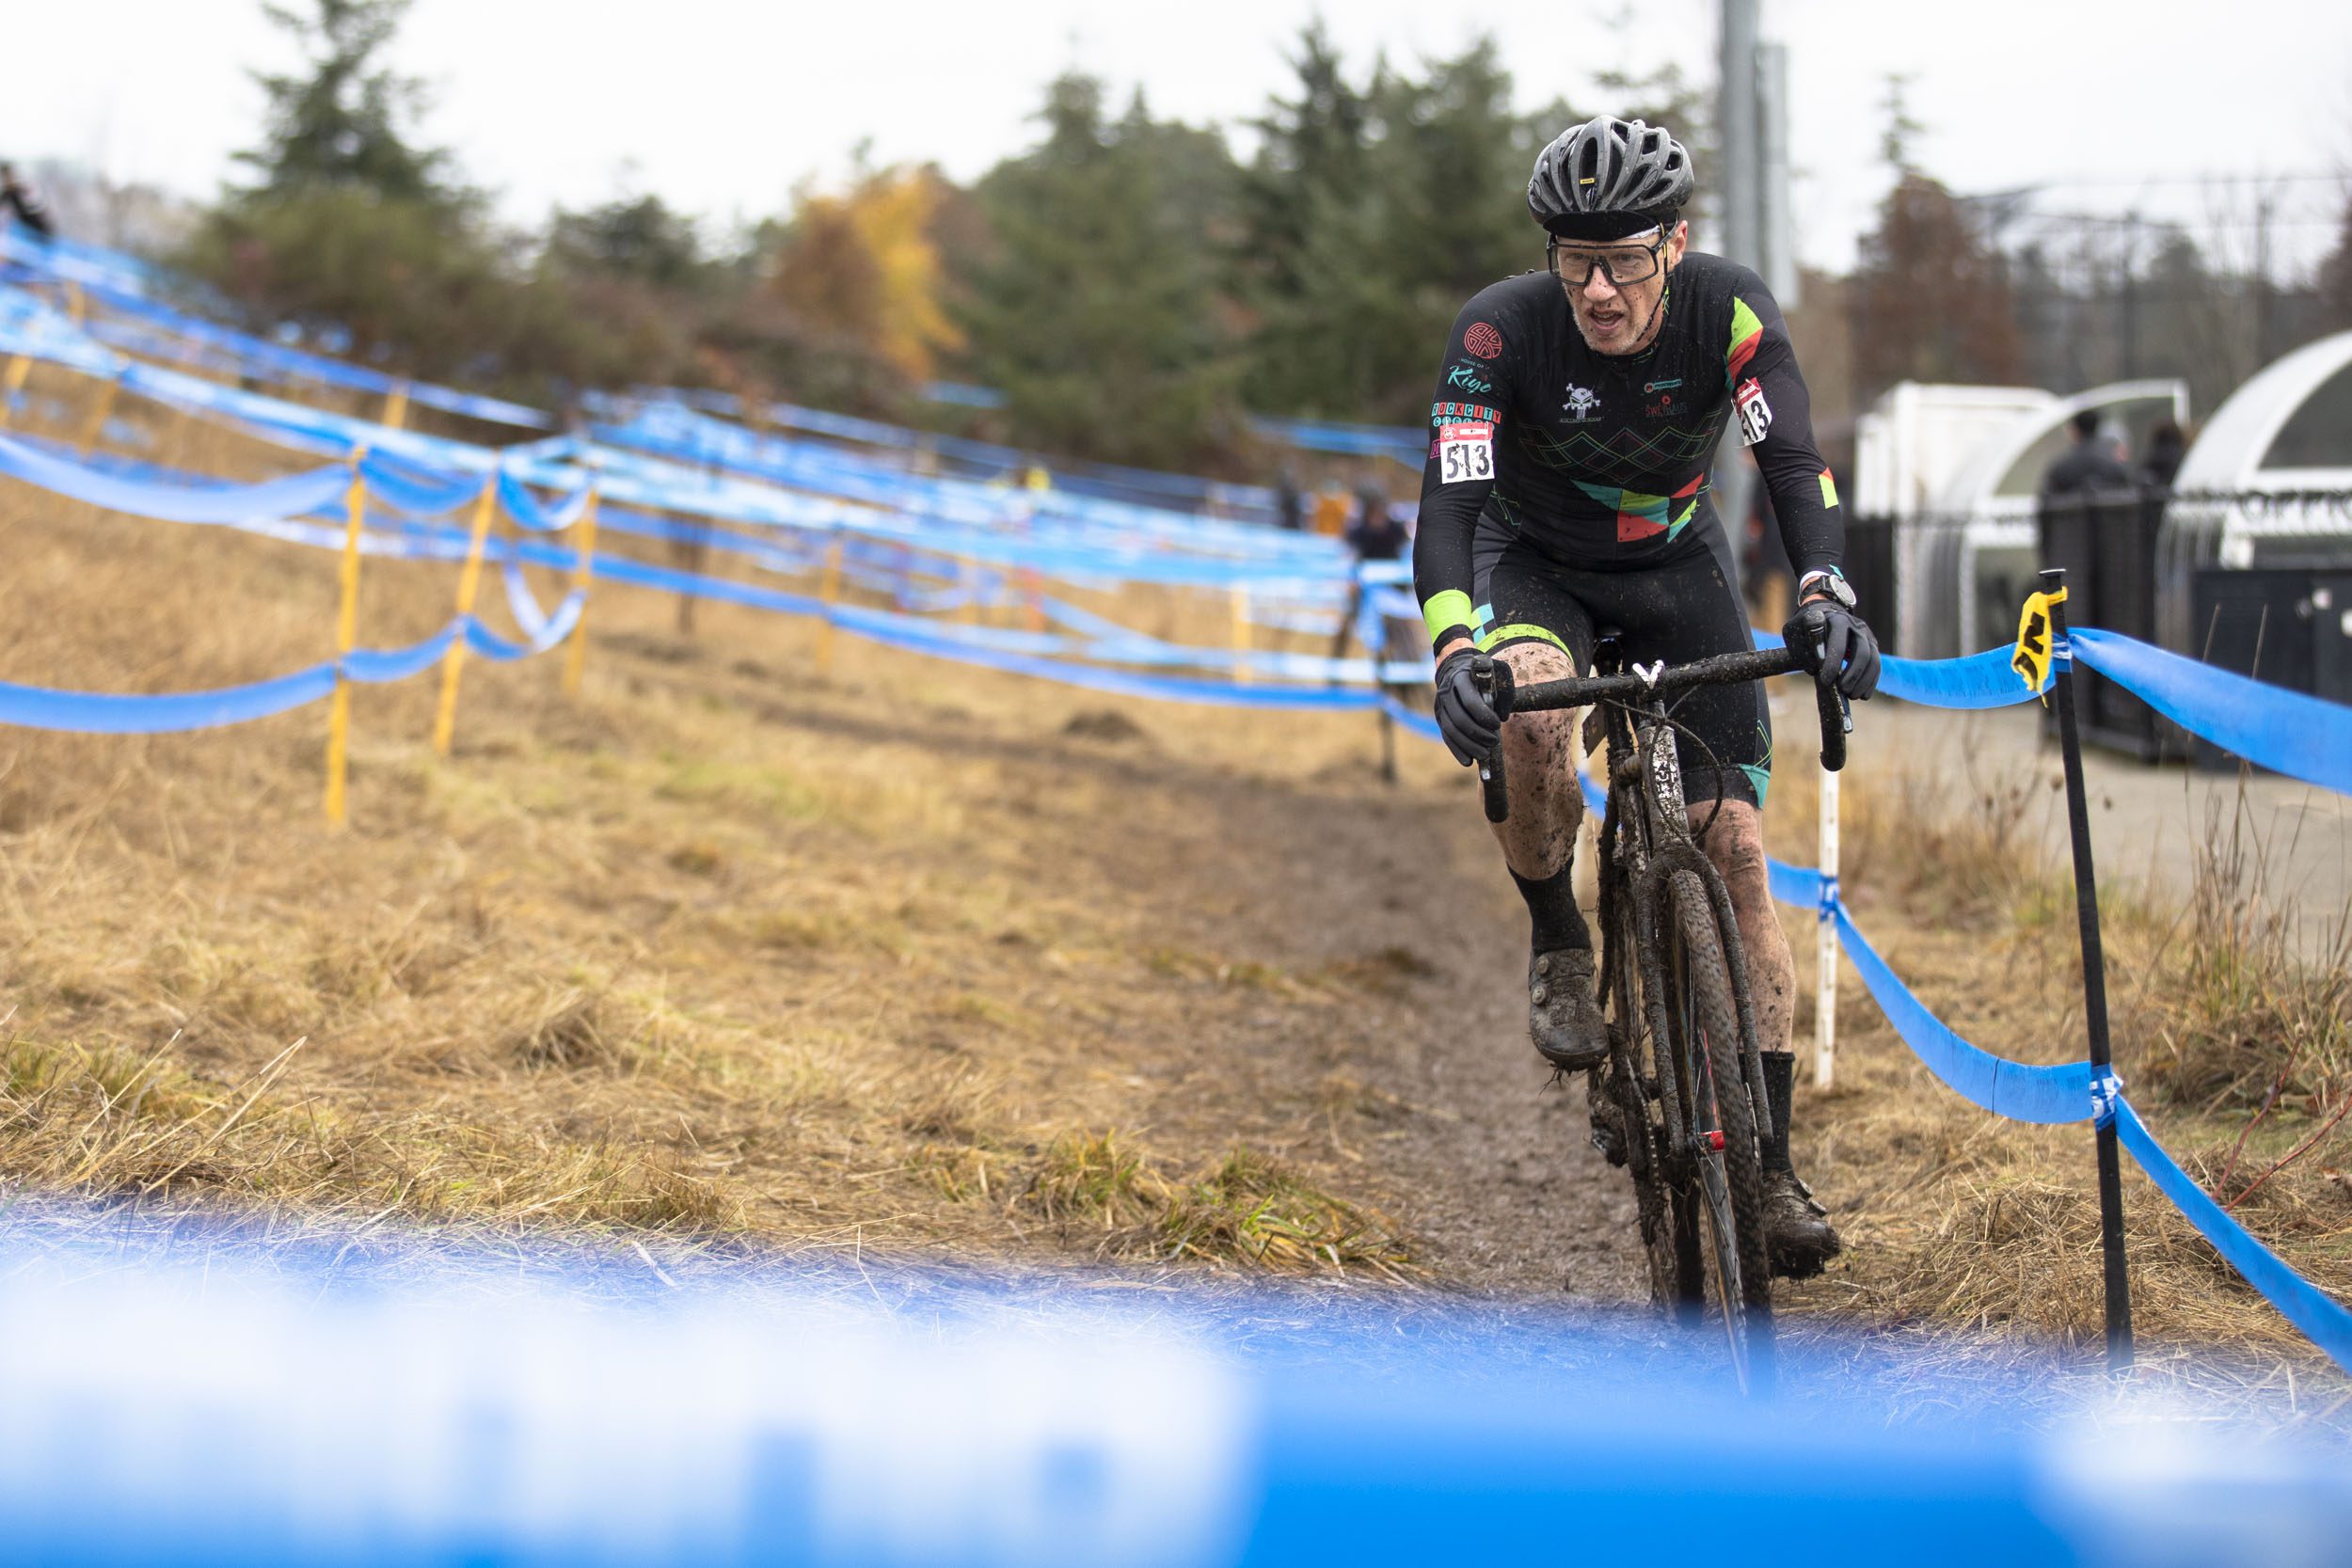 Master Men 55+ during the 2022 Canadian Cyclocross Championships at Layritz Park in Saanich, BC, November 26, 2022. (Photo by Nick Iwanyshyn)